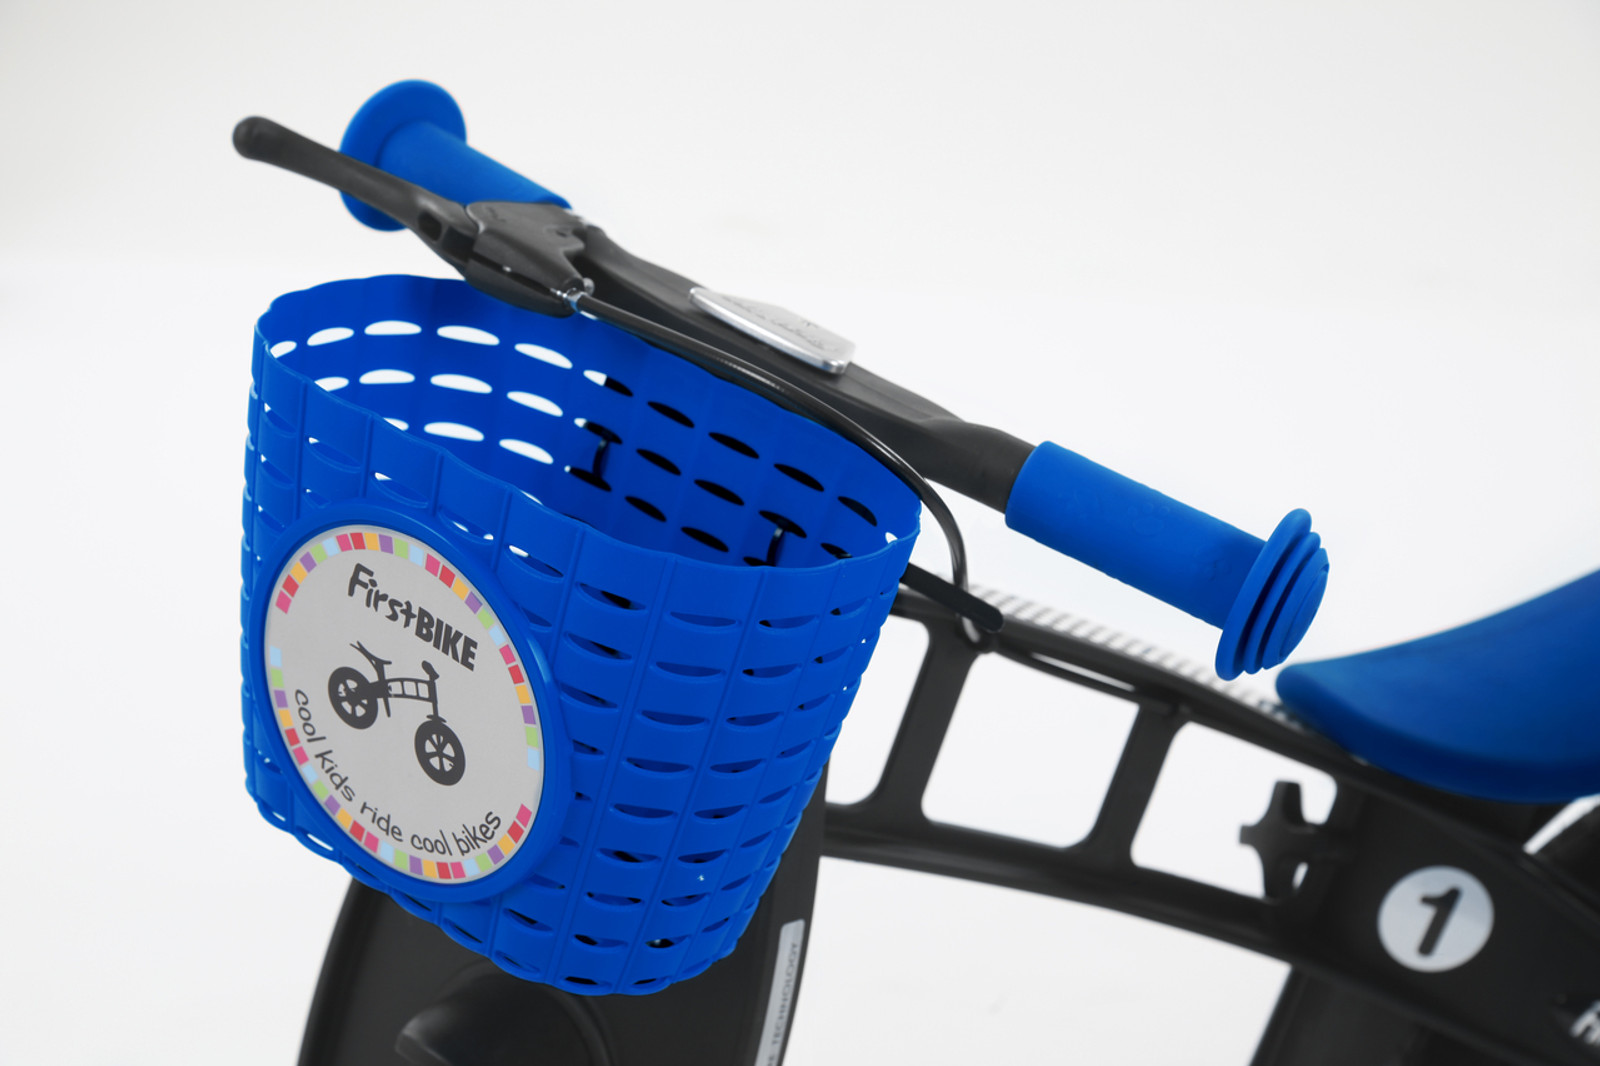 Handle Bar Baskets for FirstBIKE